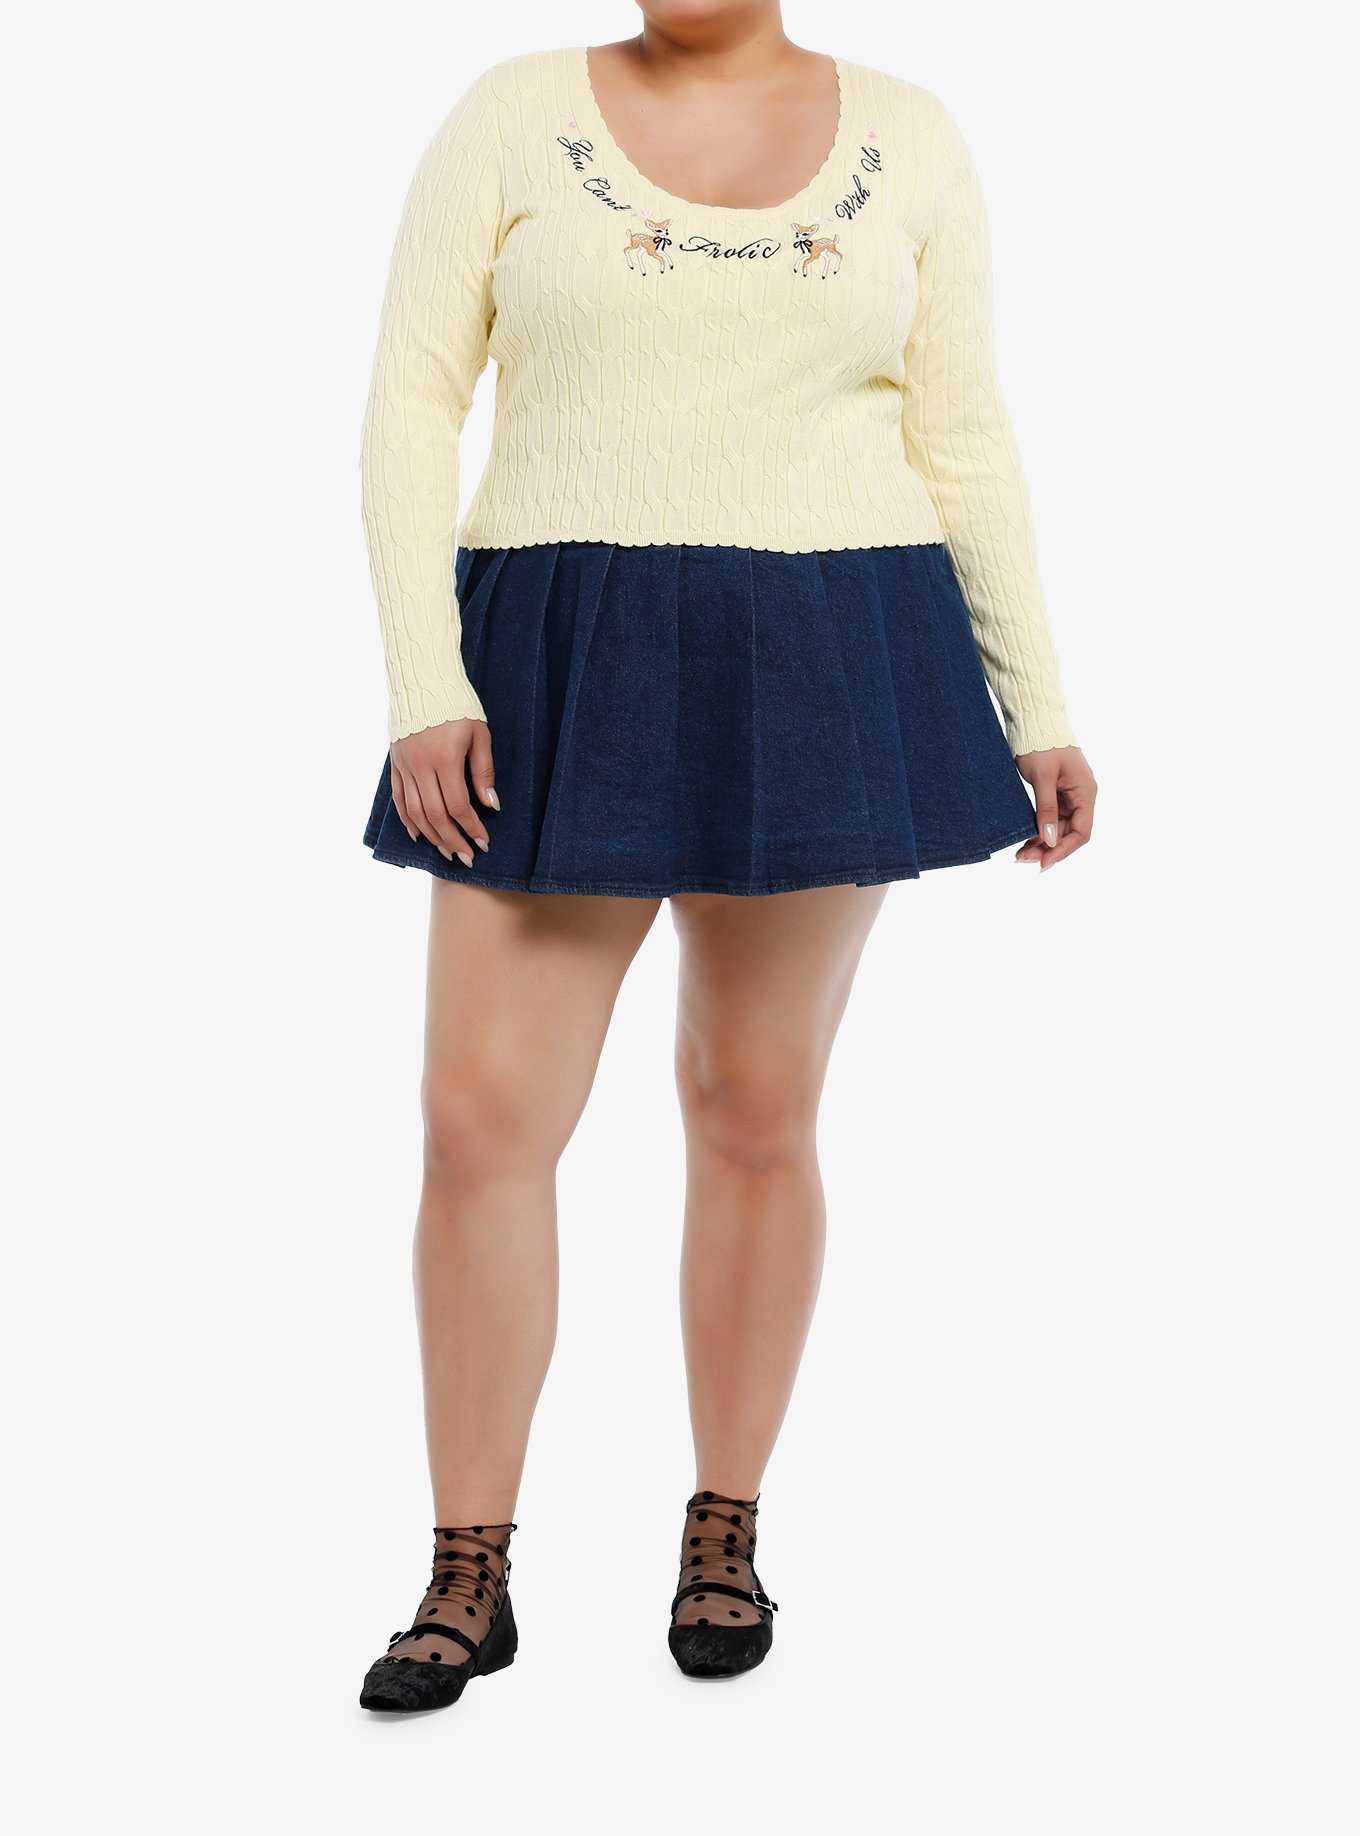 Sweet Society Can't Frolic With Us Deer Girls Long-Sleeve Sweater Plus Size, , hi-res